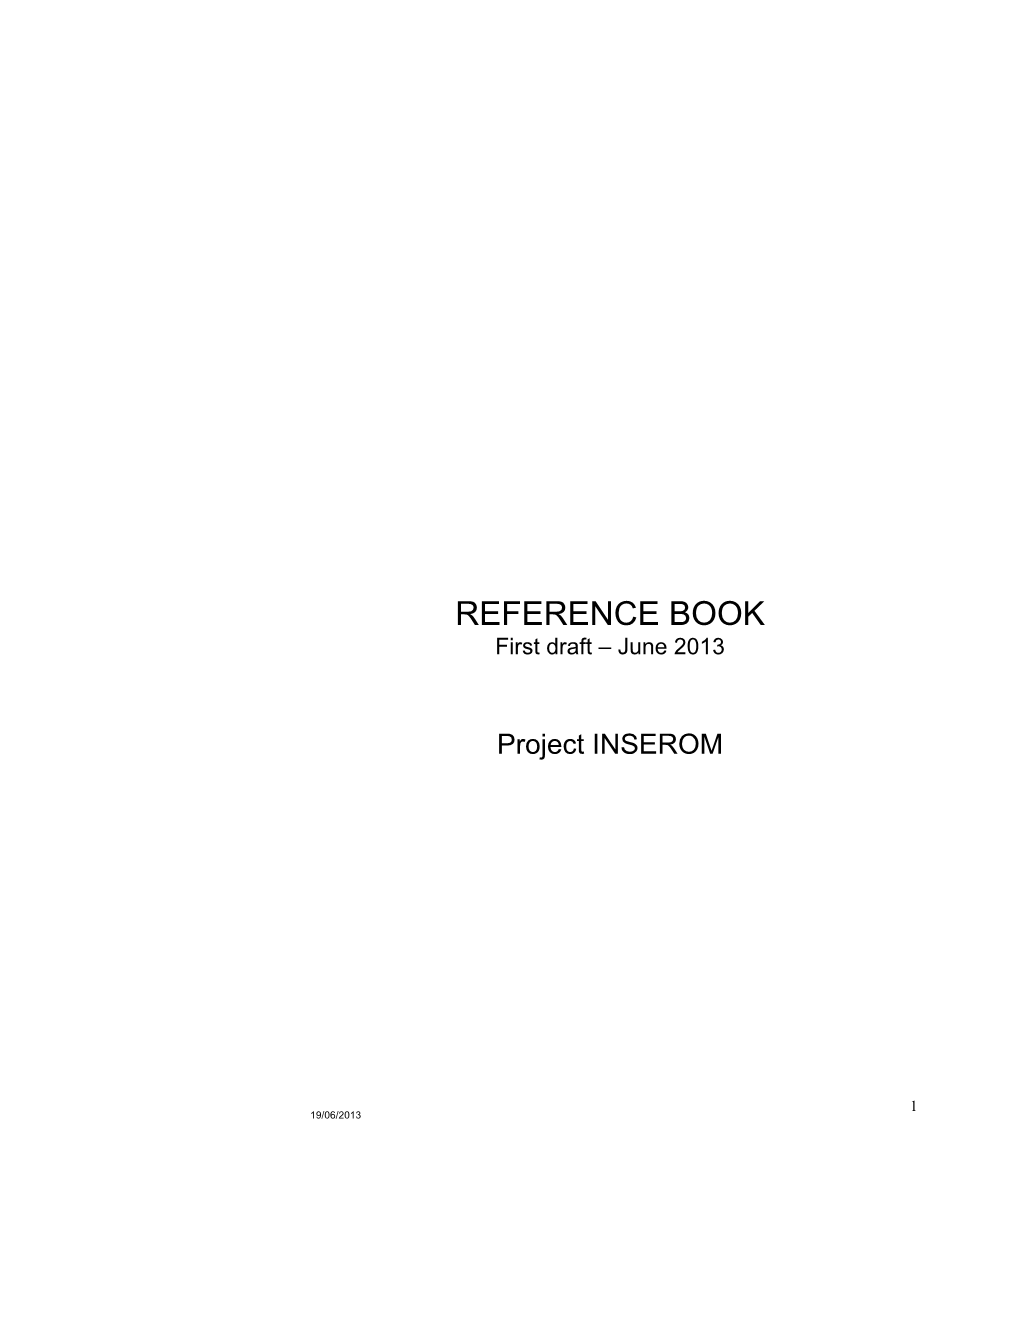 INSEROM Reference Book 190613.Final